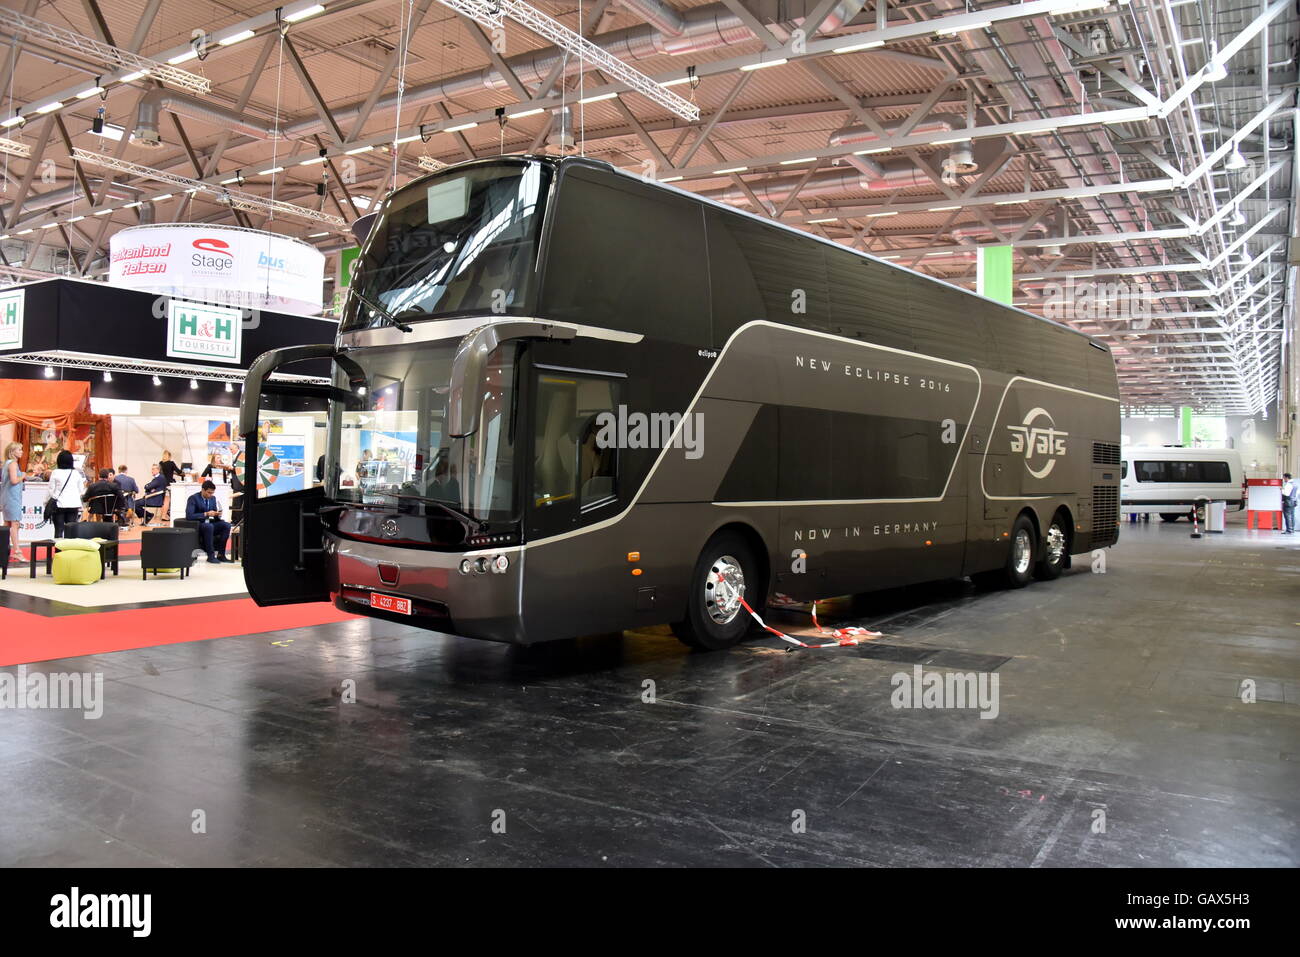 An Ayats Eclipse bus made by Spanish coach manufacturer Carrocerias Ayats SA seen at the RDA Workshop, an international trade fair for travel coach tourism and group tours, in Cologne, Germany, 06 July 2016. Photo: Horst Galuschka/dpa - NO WIRE SERVICE - Stock Photo